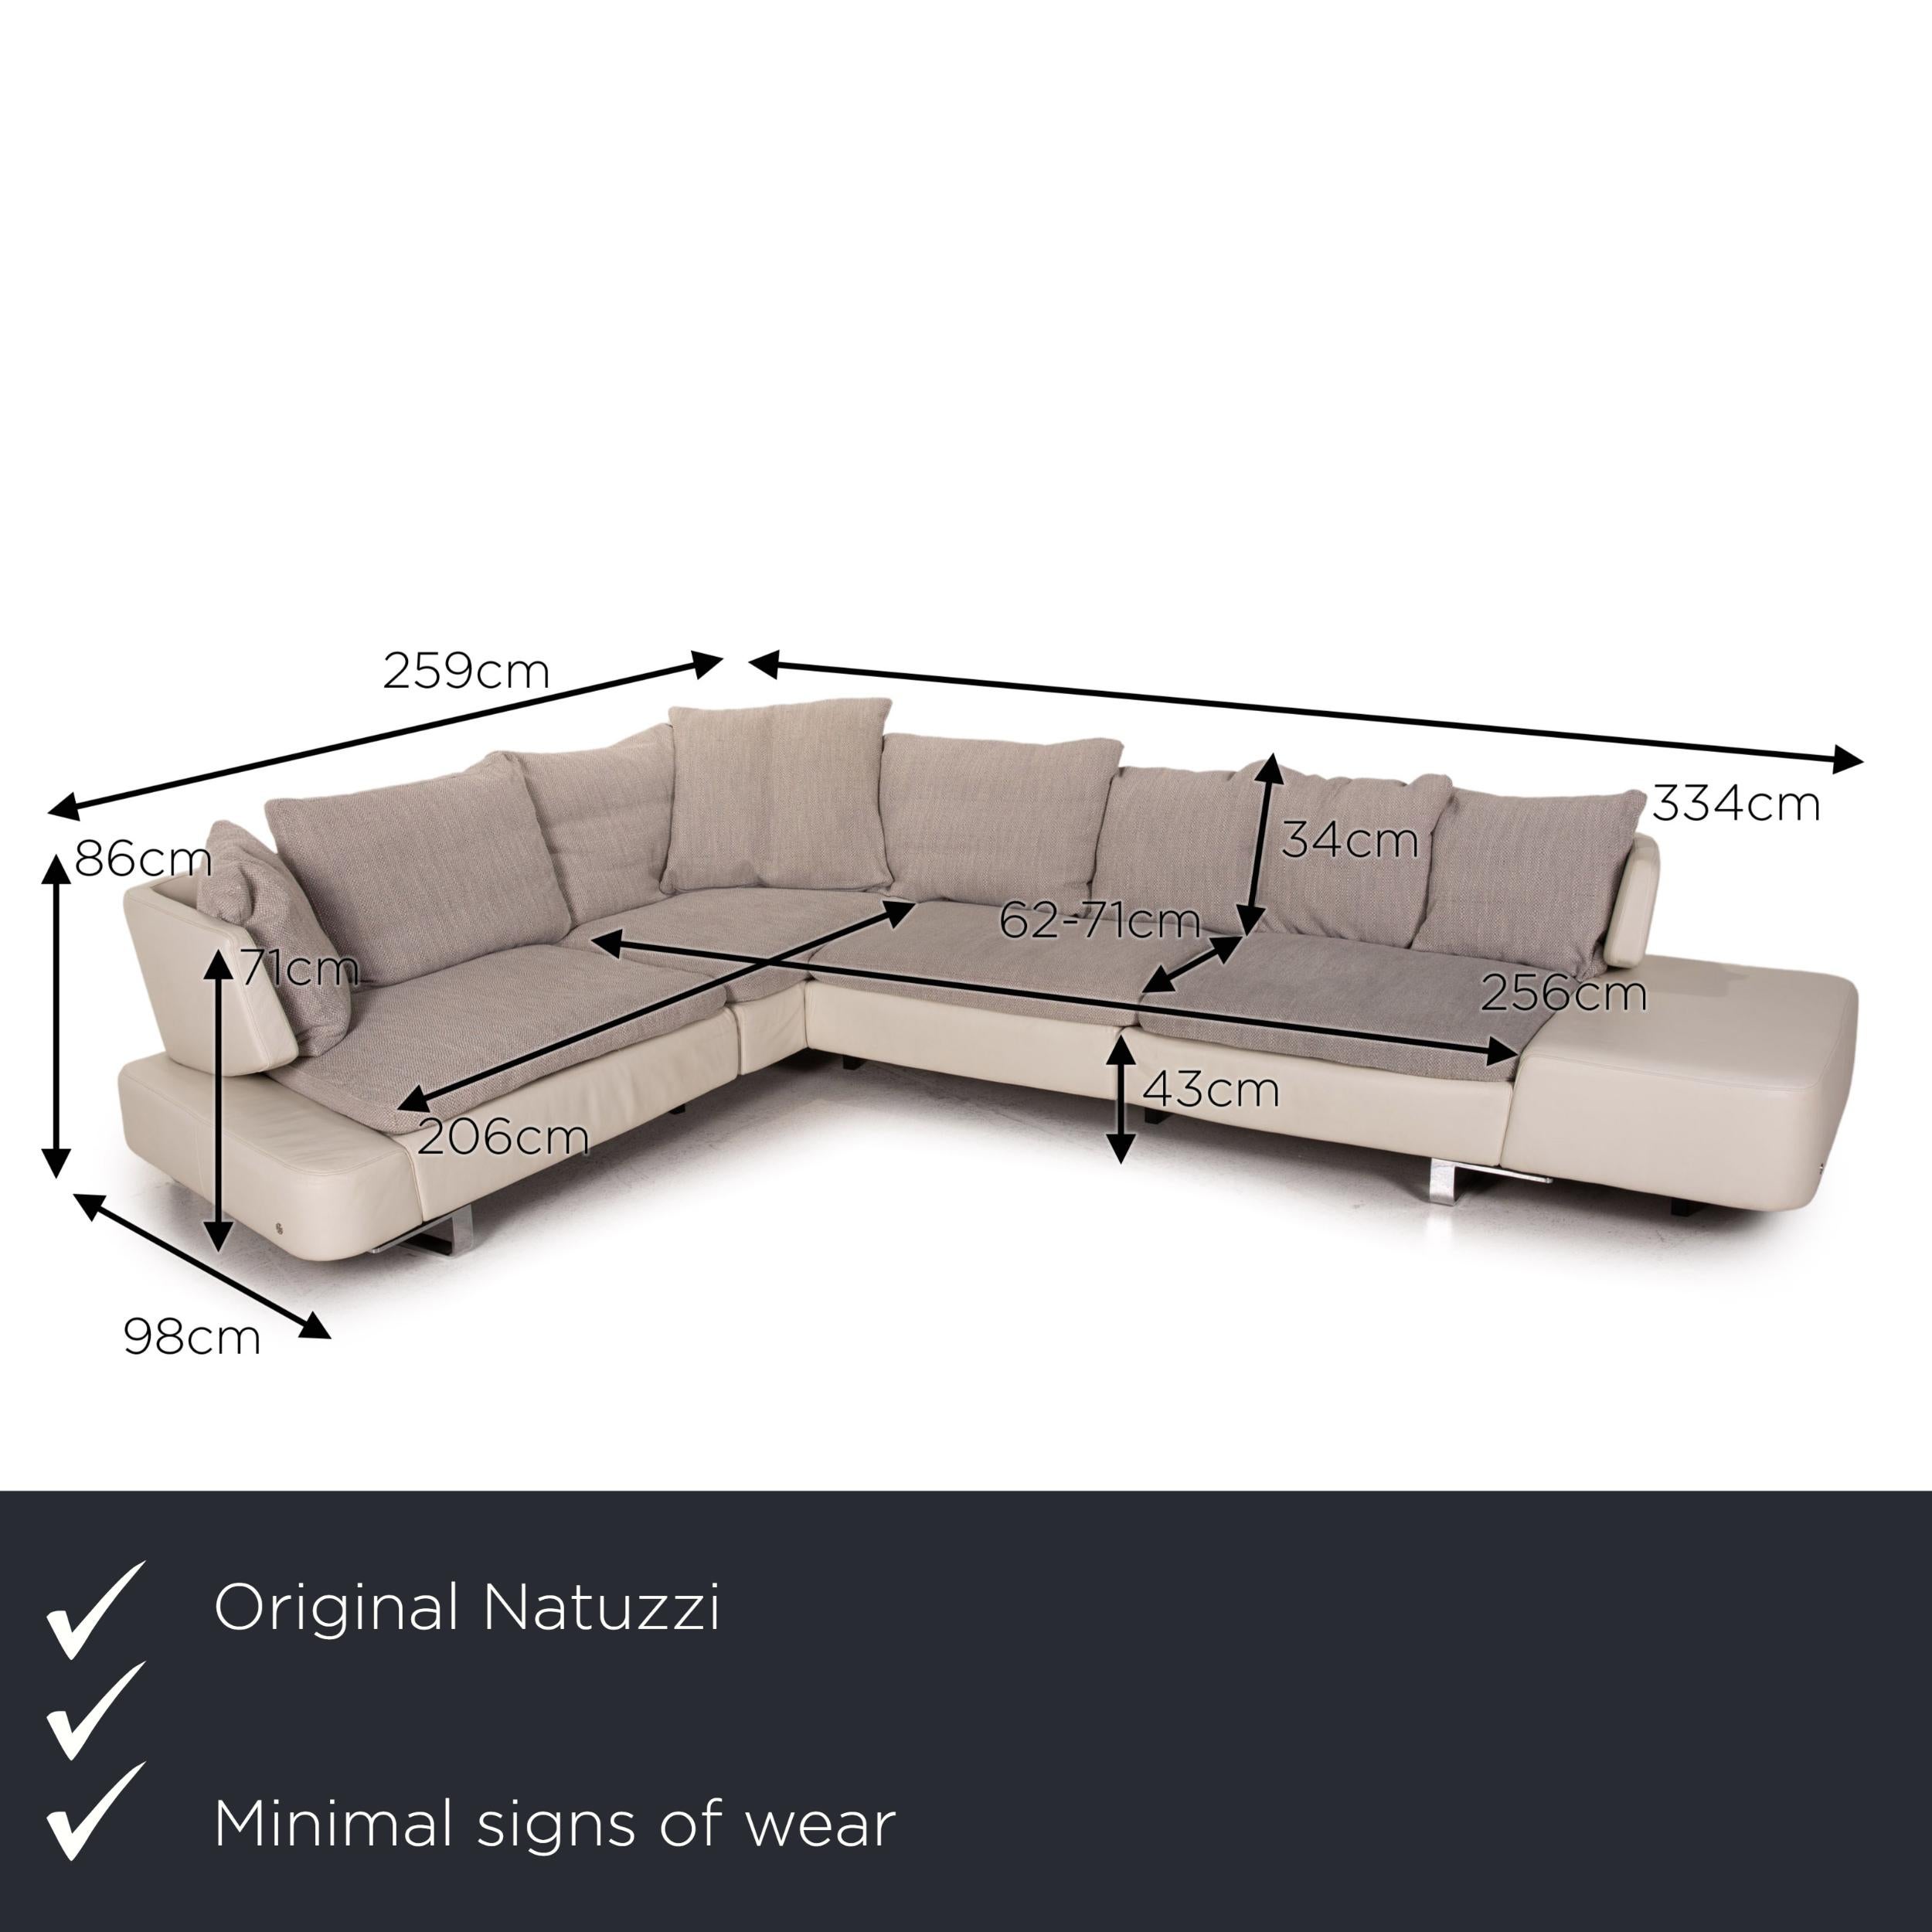 We present to you a Natuzzi Opus leather fabric corner sofa gray cream sofa couch.

 

 Product measurements in centimeters:
 

 depth: 98
 width: 259
 height: 86
 seat height: 43
 rest height: 71
 seat depth: 62
 seat width: 206
 back